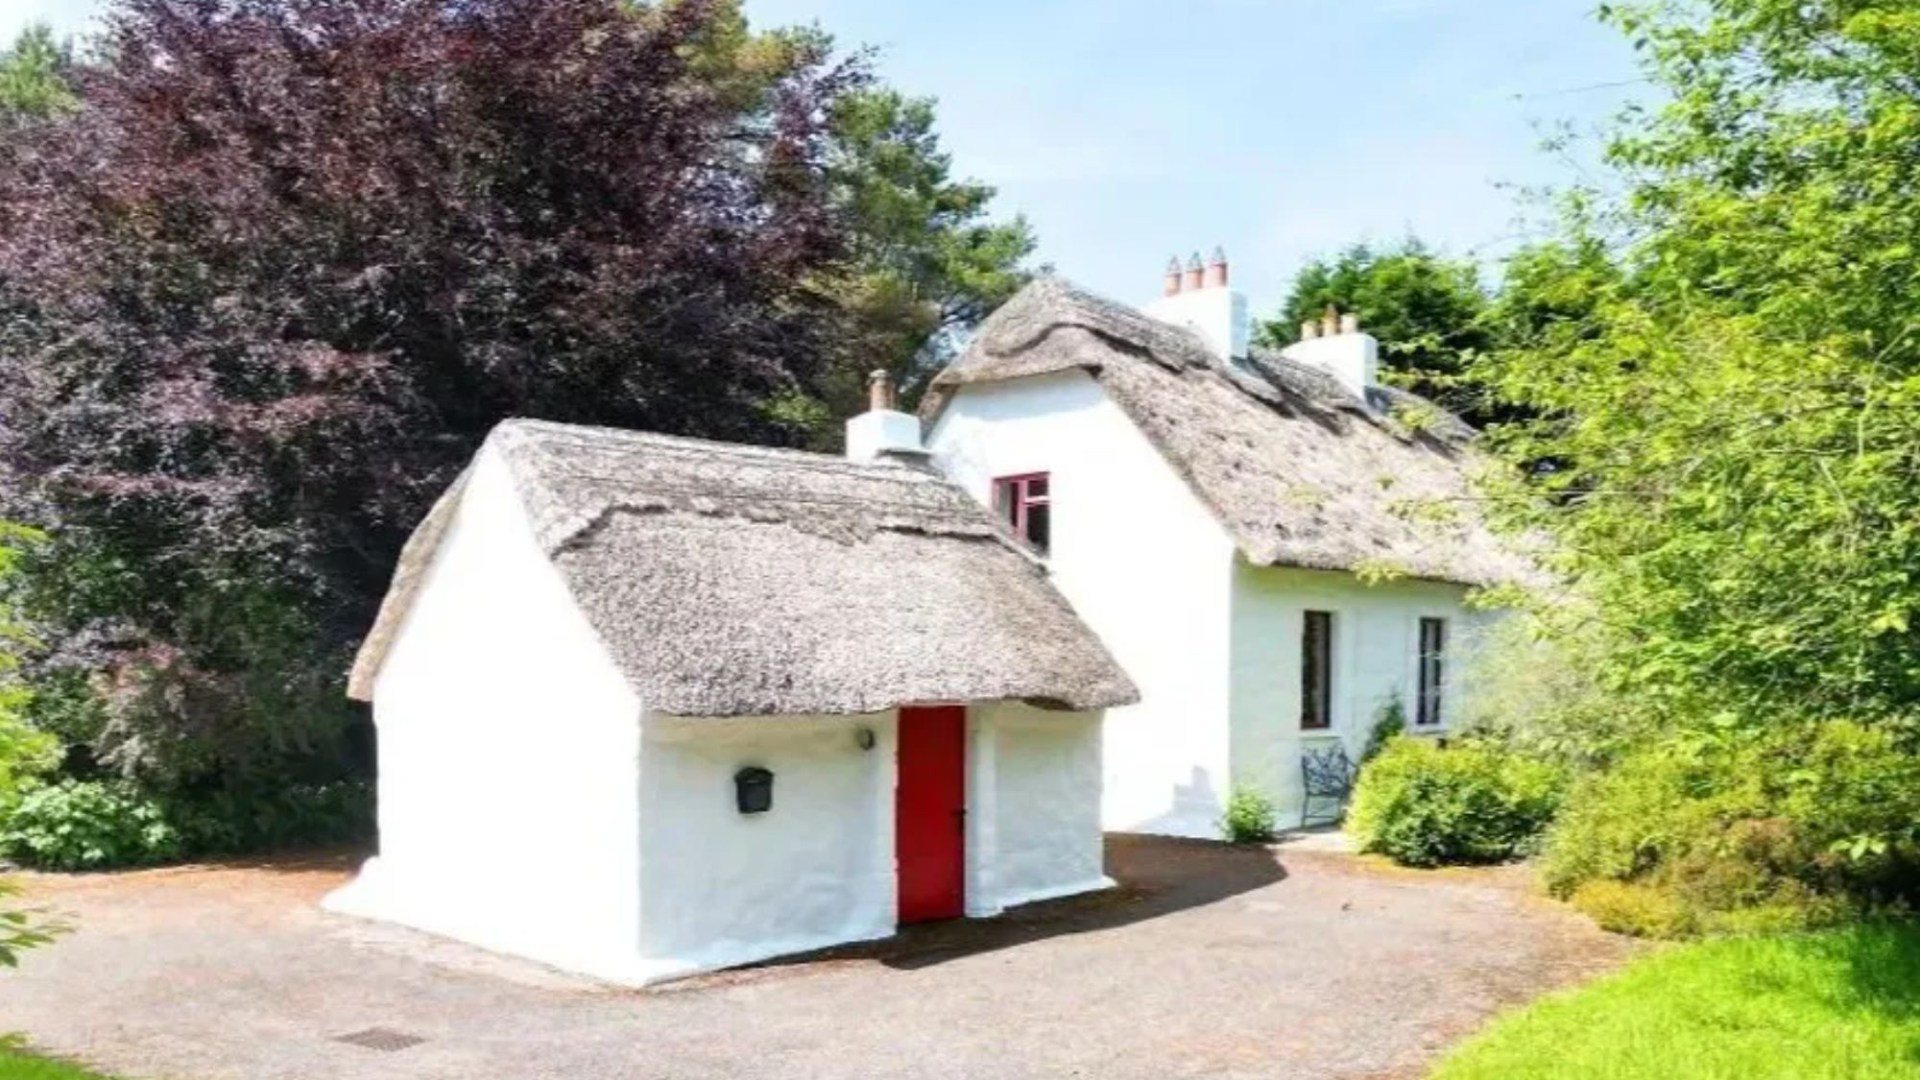 The ‘exceptional’ traditional cottage on Irish market for 225k with ‘picturesque setting’ – it’s mins from an airport [Video]